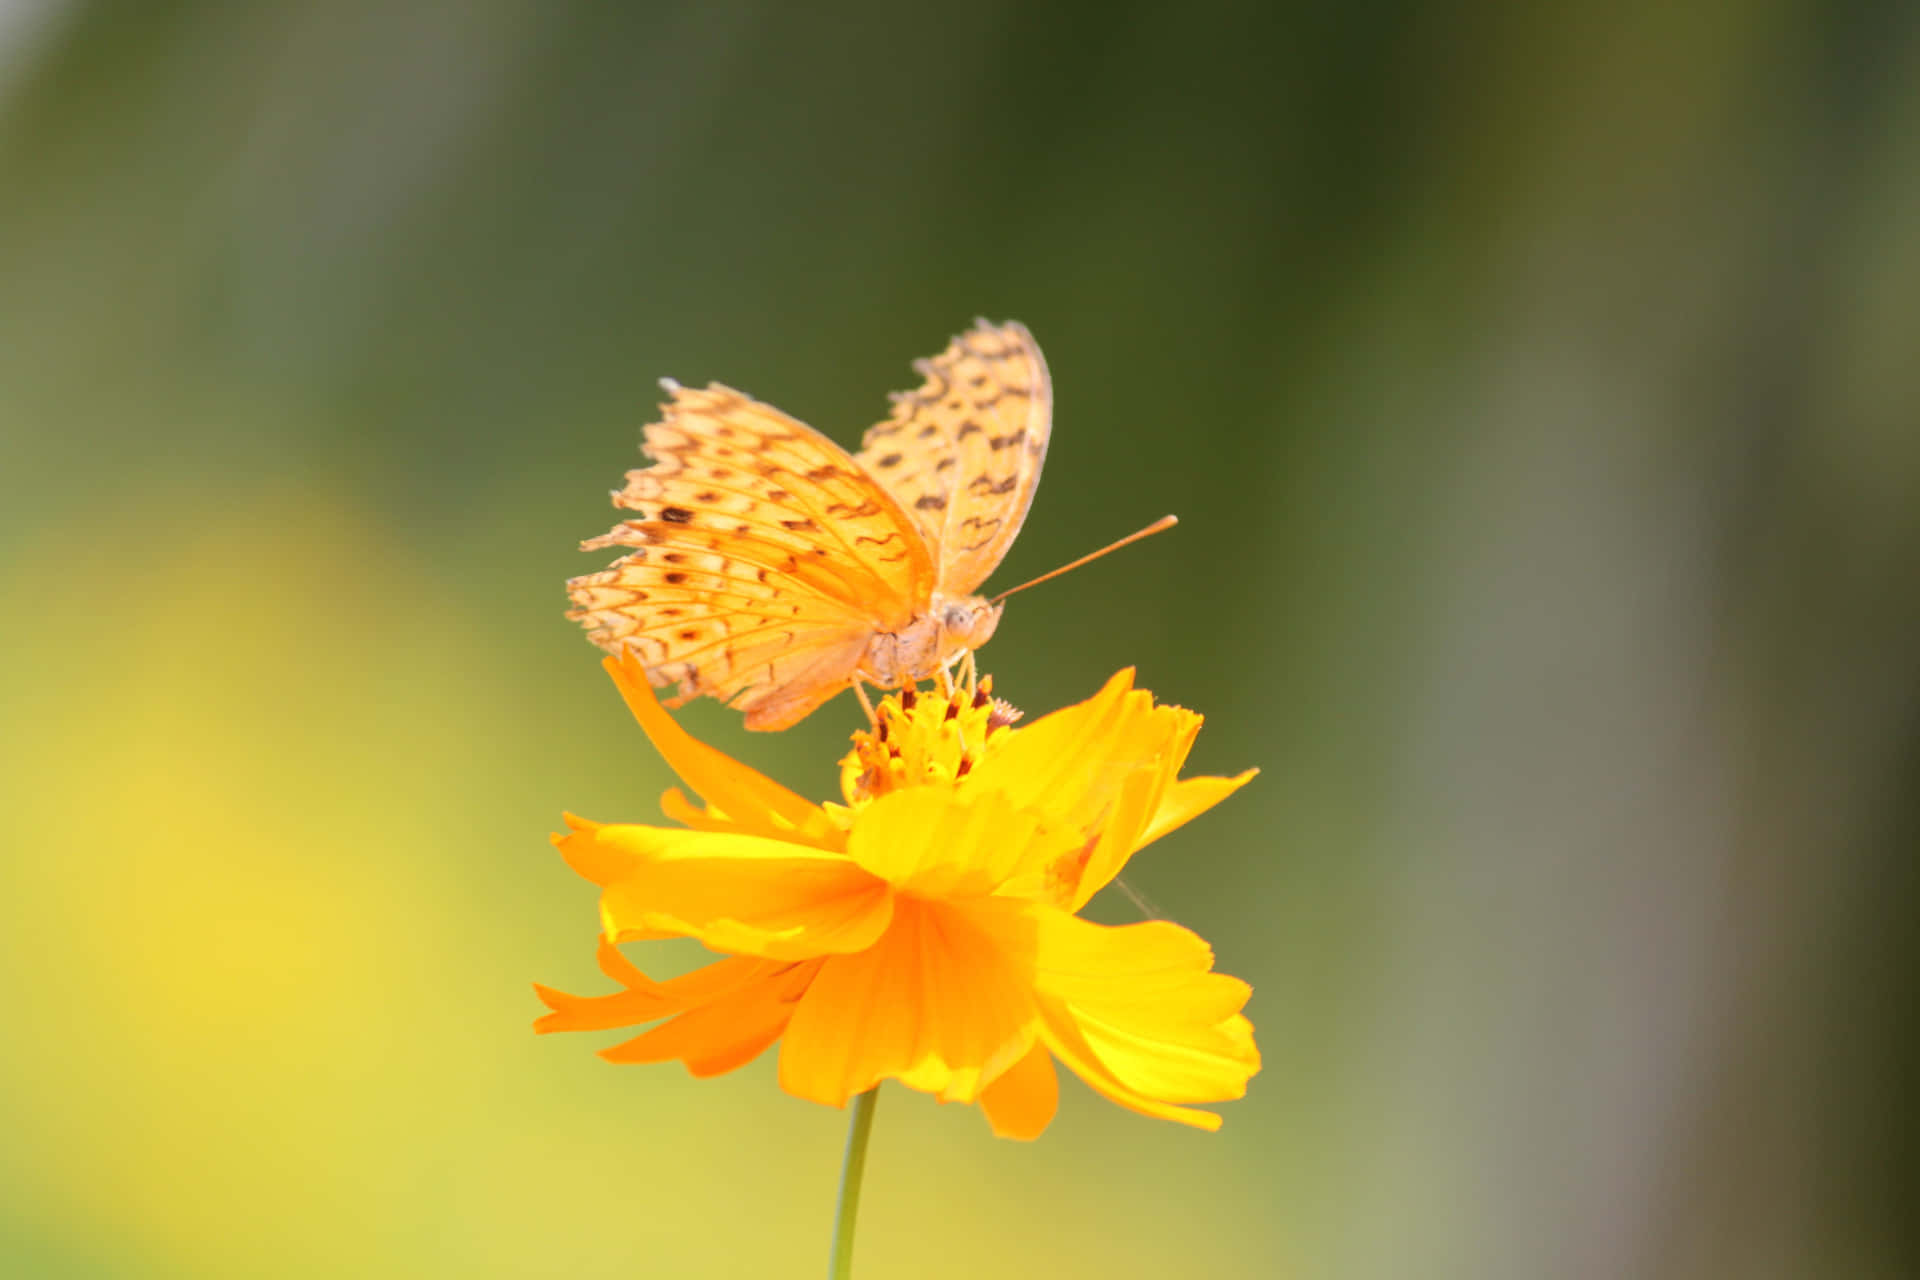 Brighten up your day with these vibrant yellow butterflies! Wallpaper